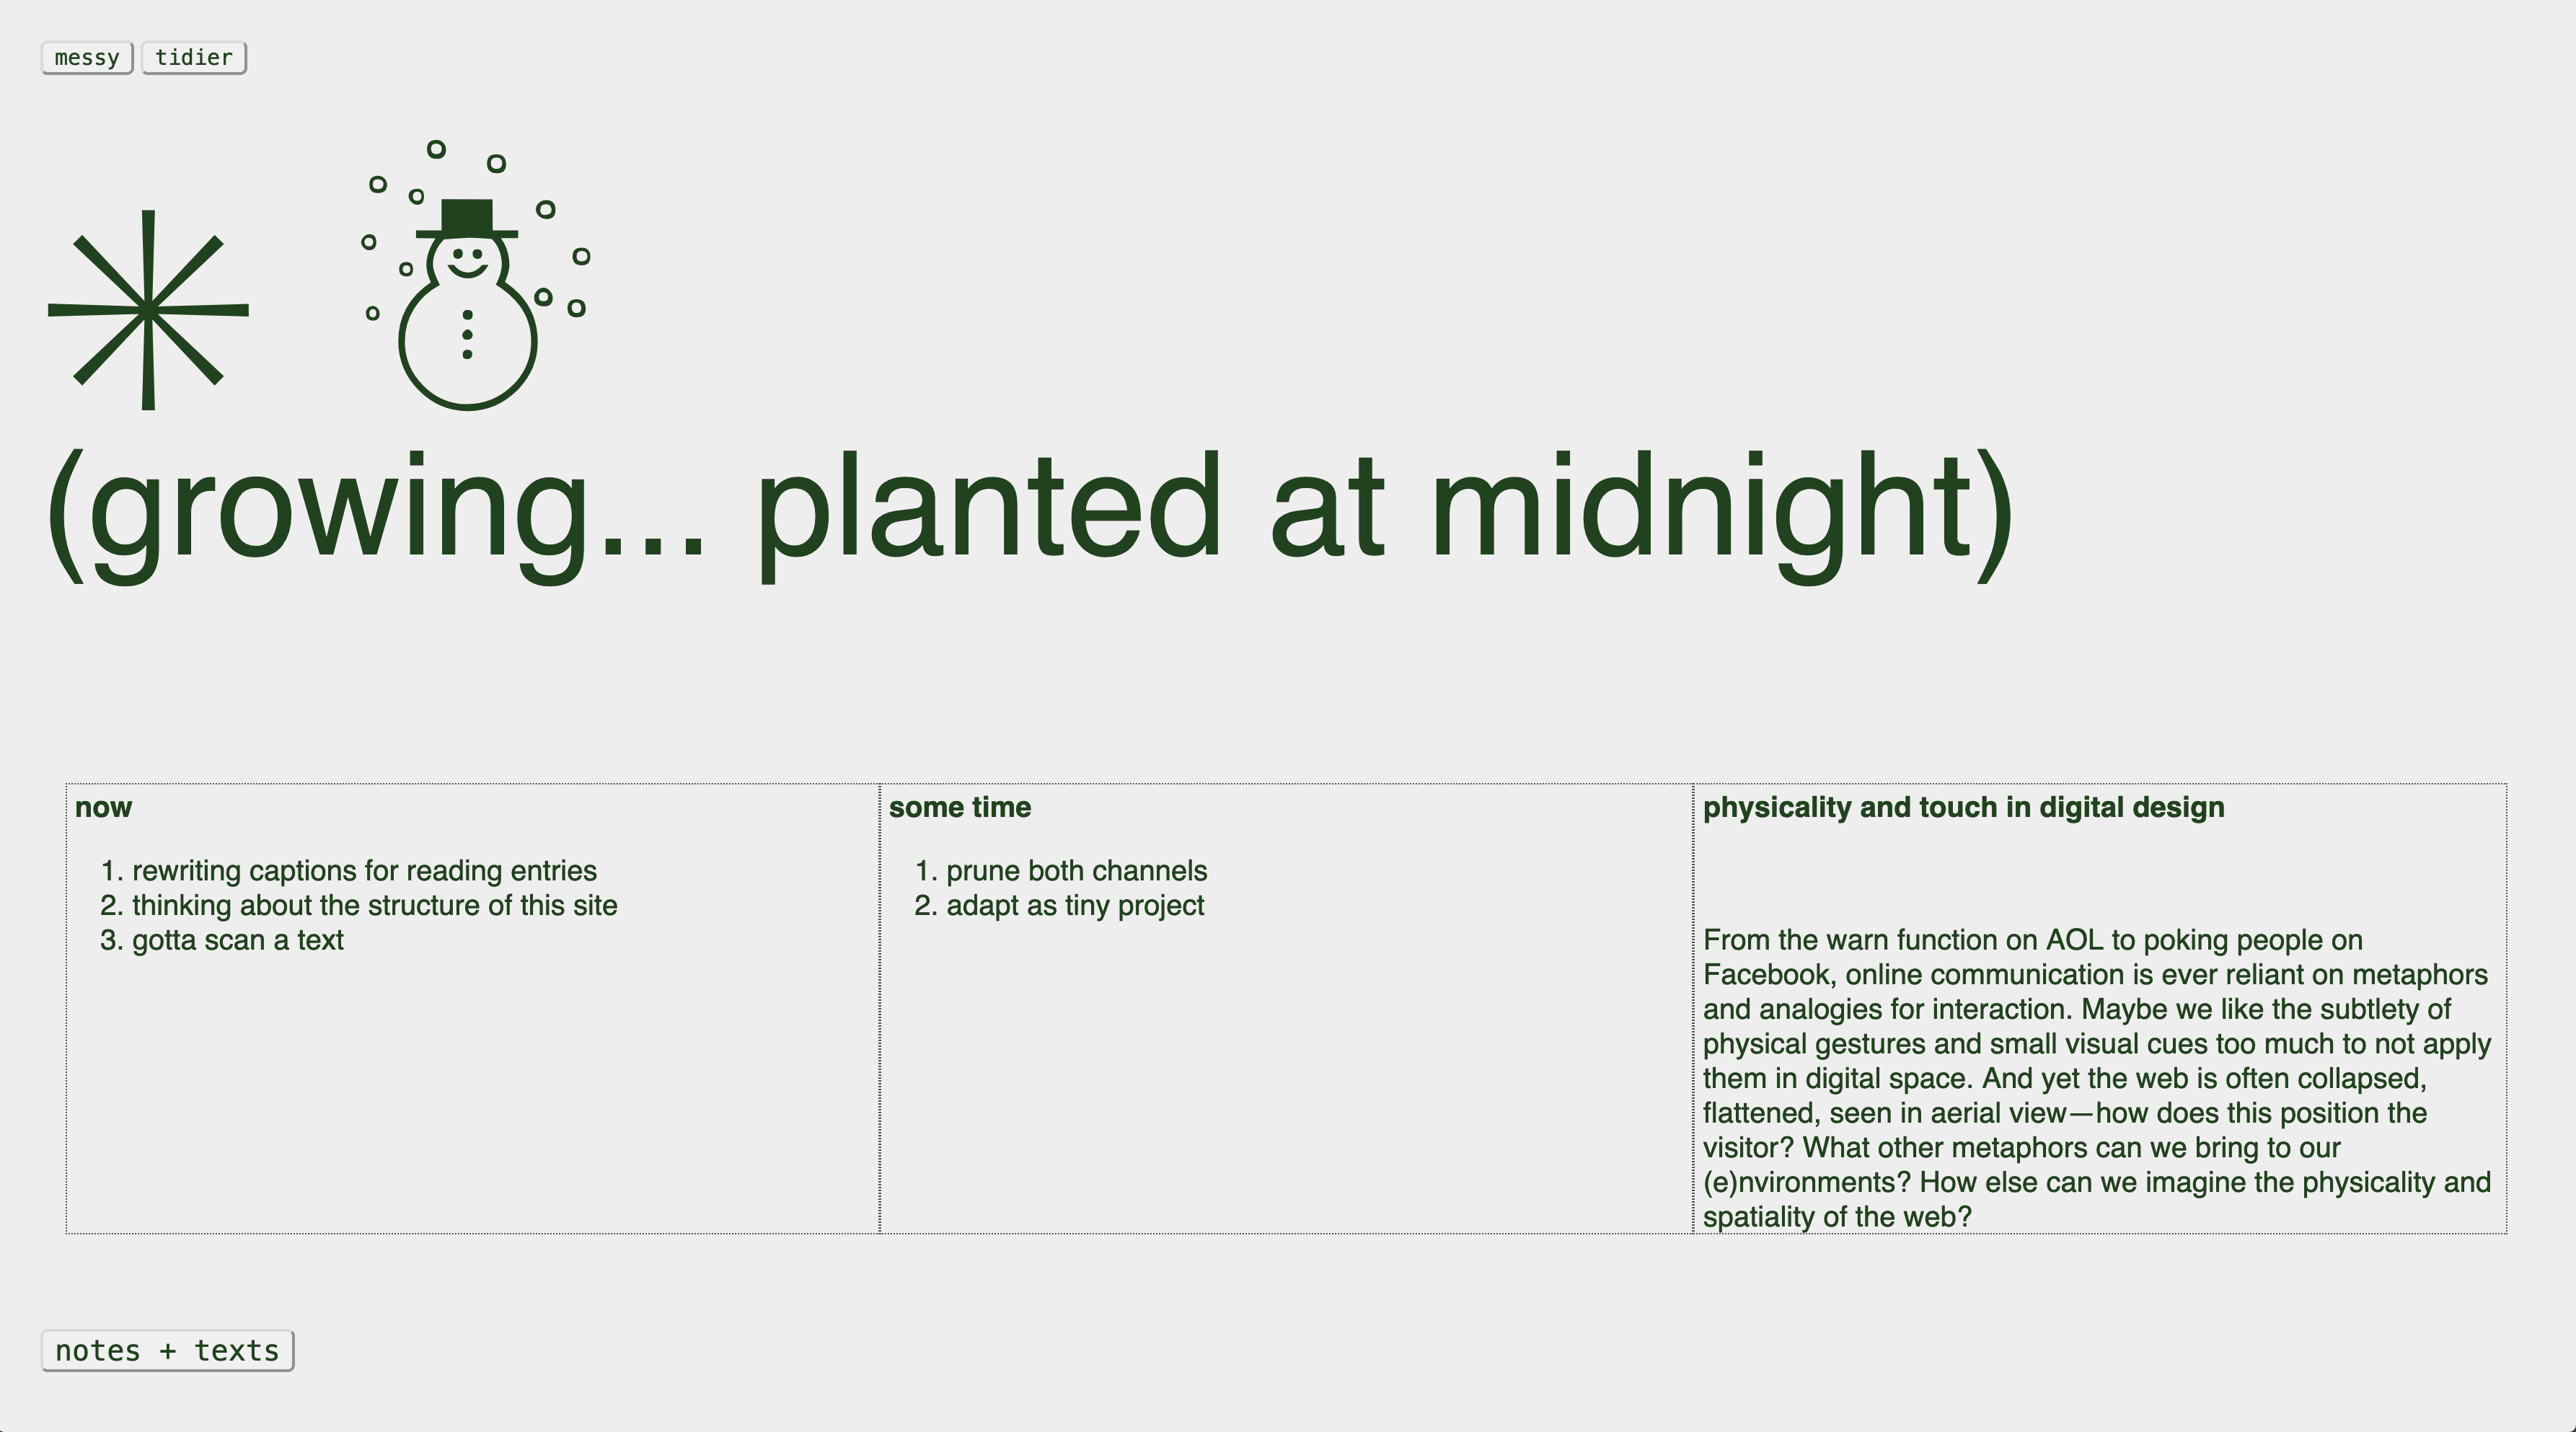 webpage with a light gray background: in a big sans serif font is the text '(growing... planted at midnight)' below a large flower/snowflake glyph and a symbol/glyph of a snowperson. Under the heading is more text about the website and a few buttons containing links to other URLs with relevant information. The text is a dark green.